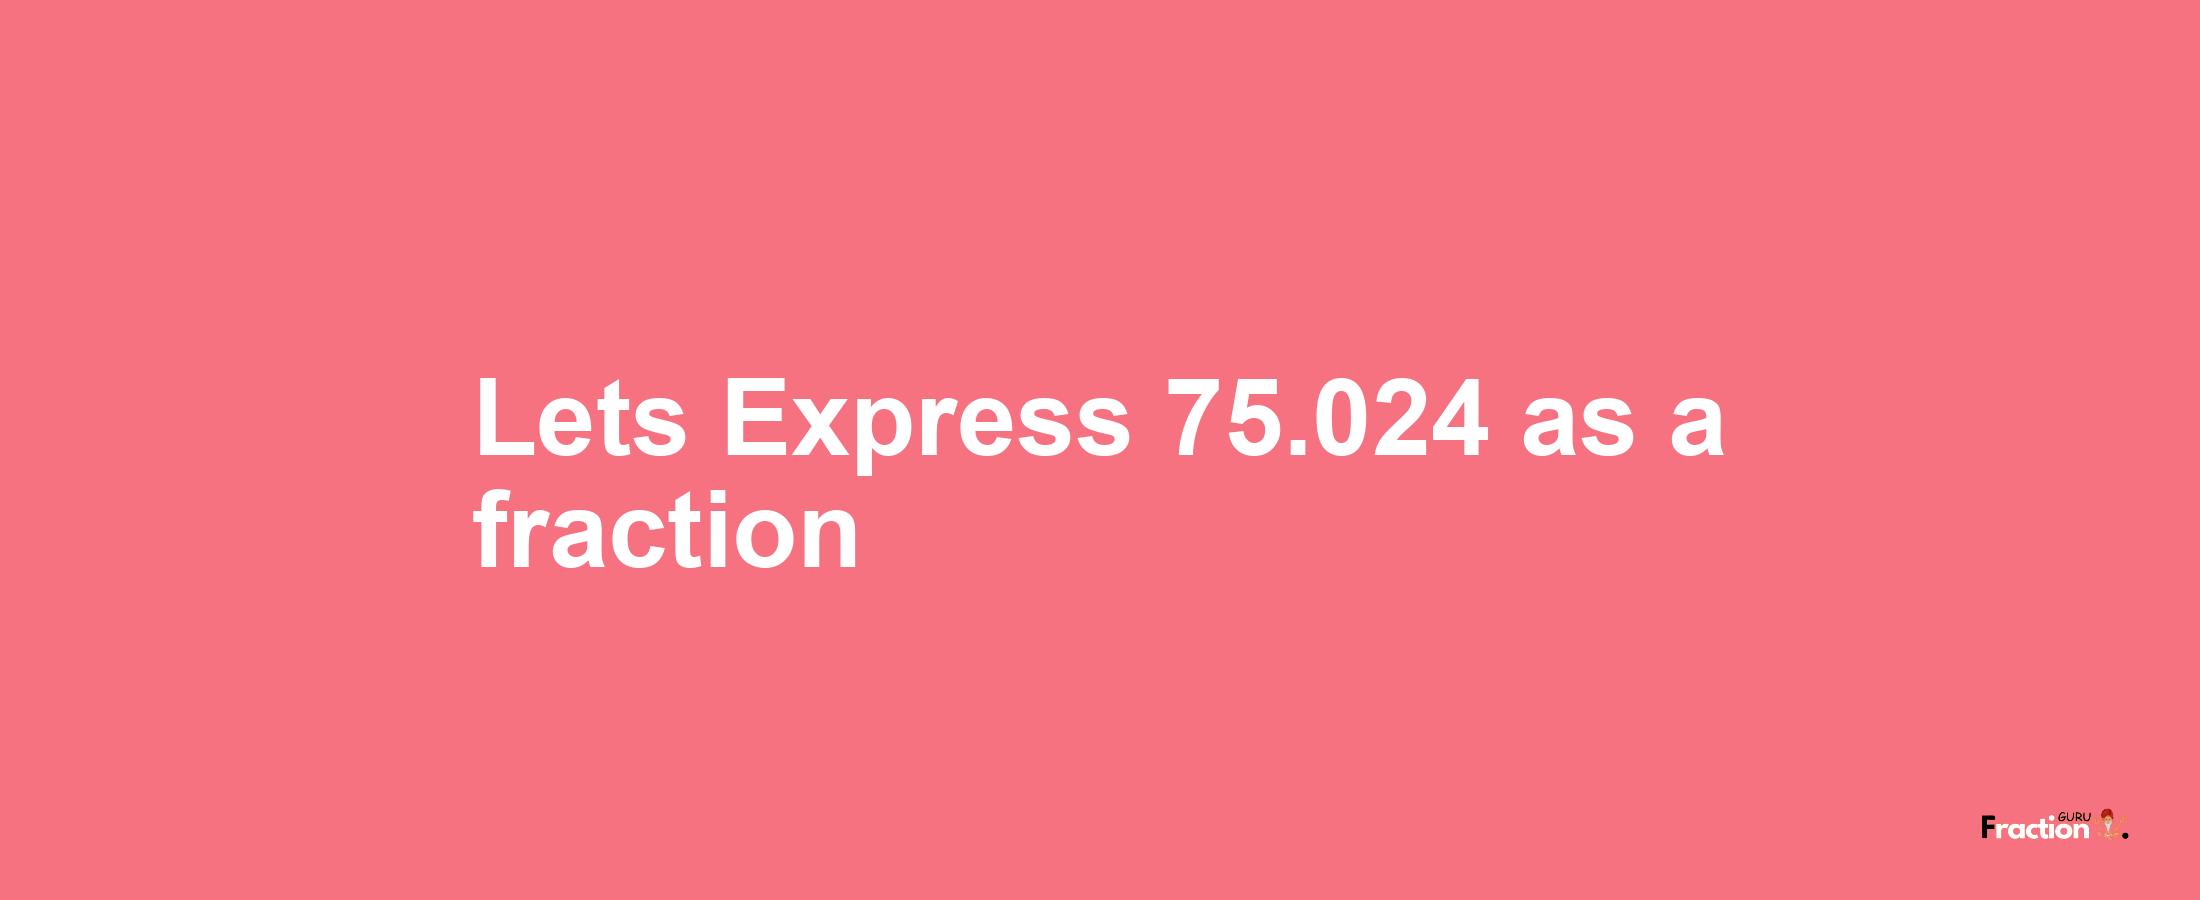 Lets Express 75.024 as afraction